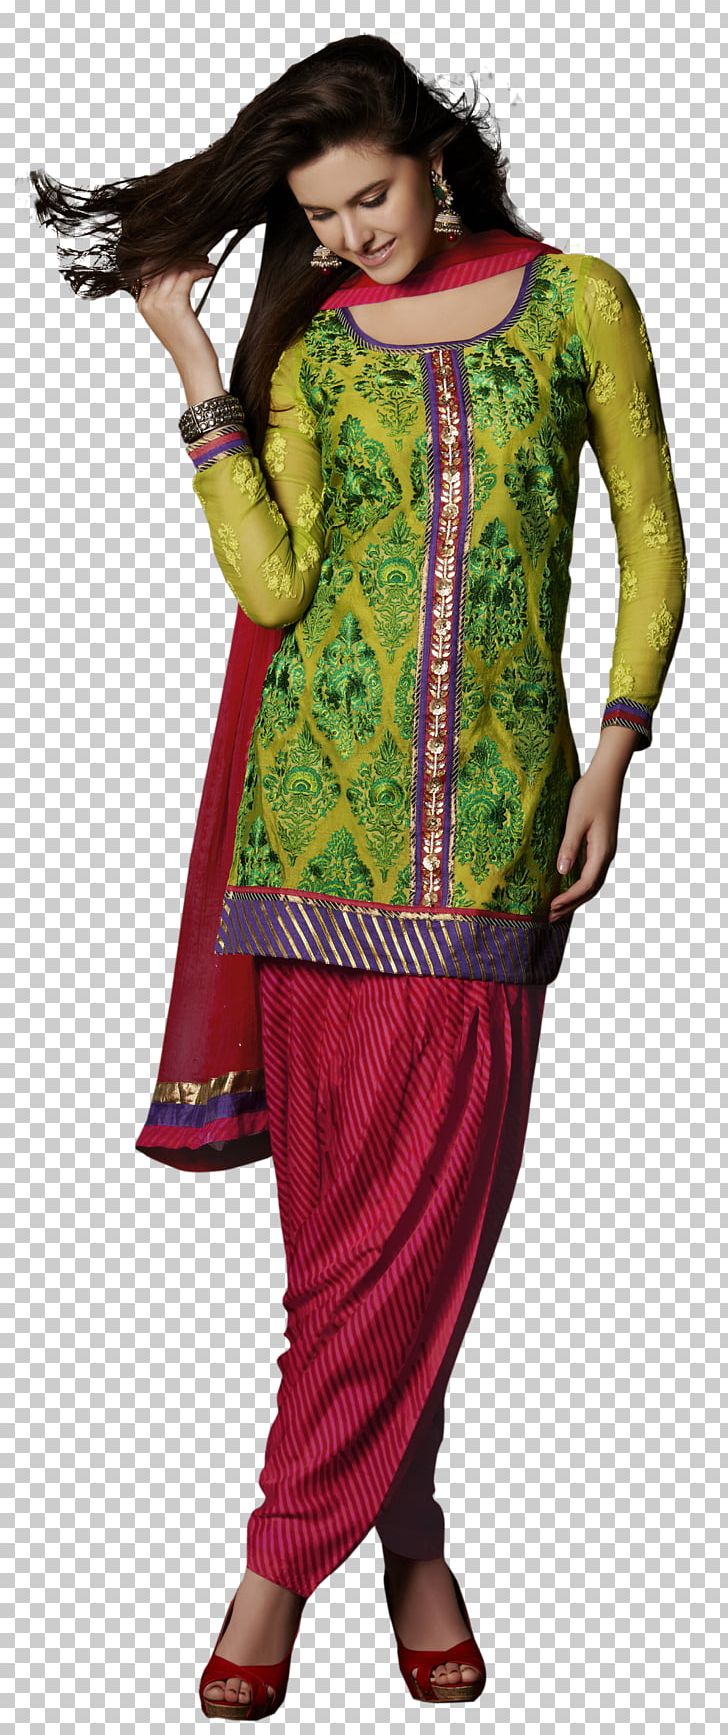 Vaisakhi Patiala Magenta Green Costume PNG, Clipart, Baisakhi, Clothing, Color, Costume, Fluorescence Free PNG Download